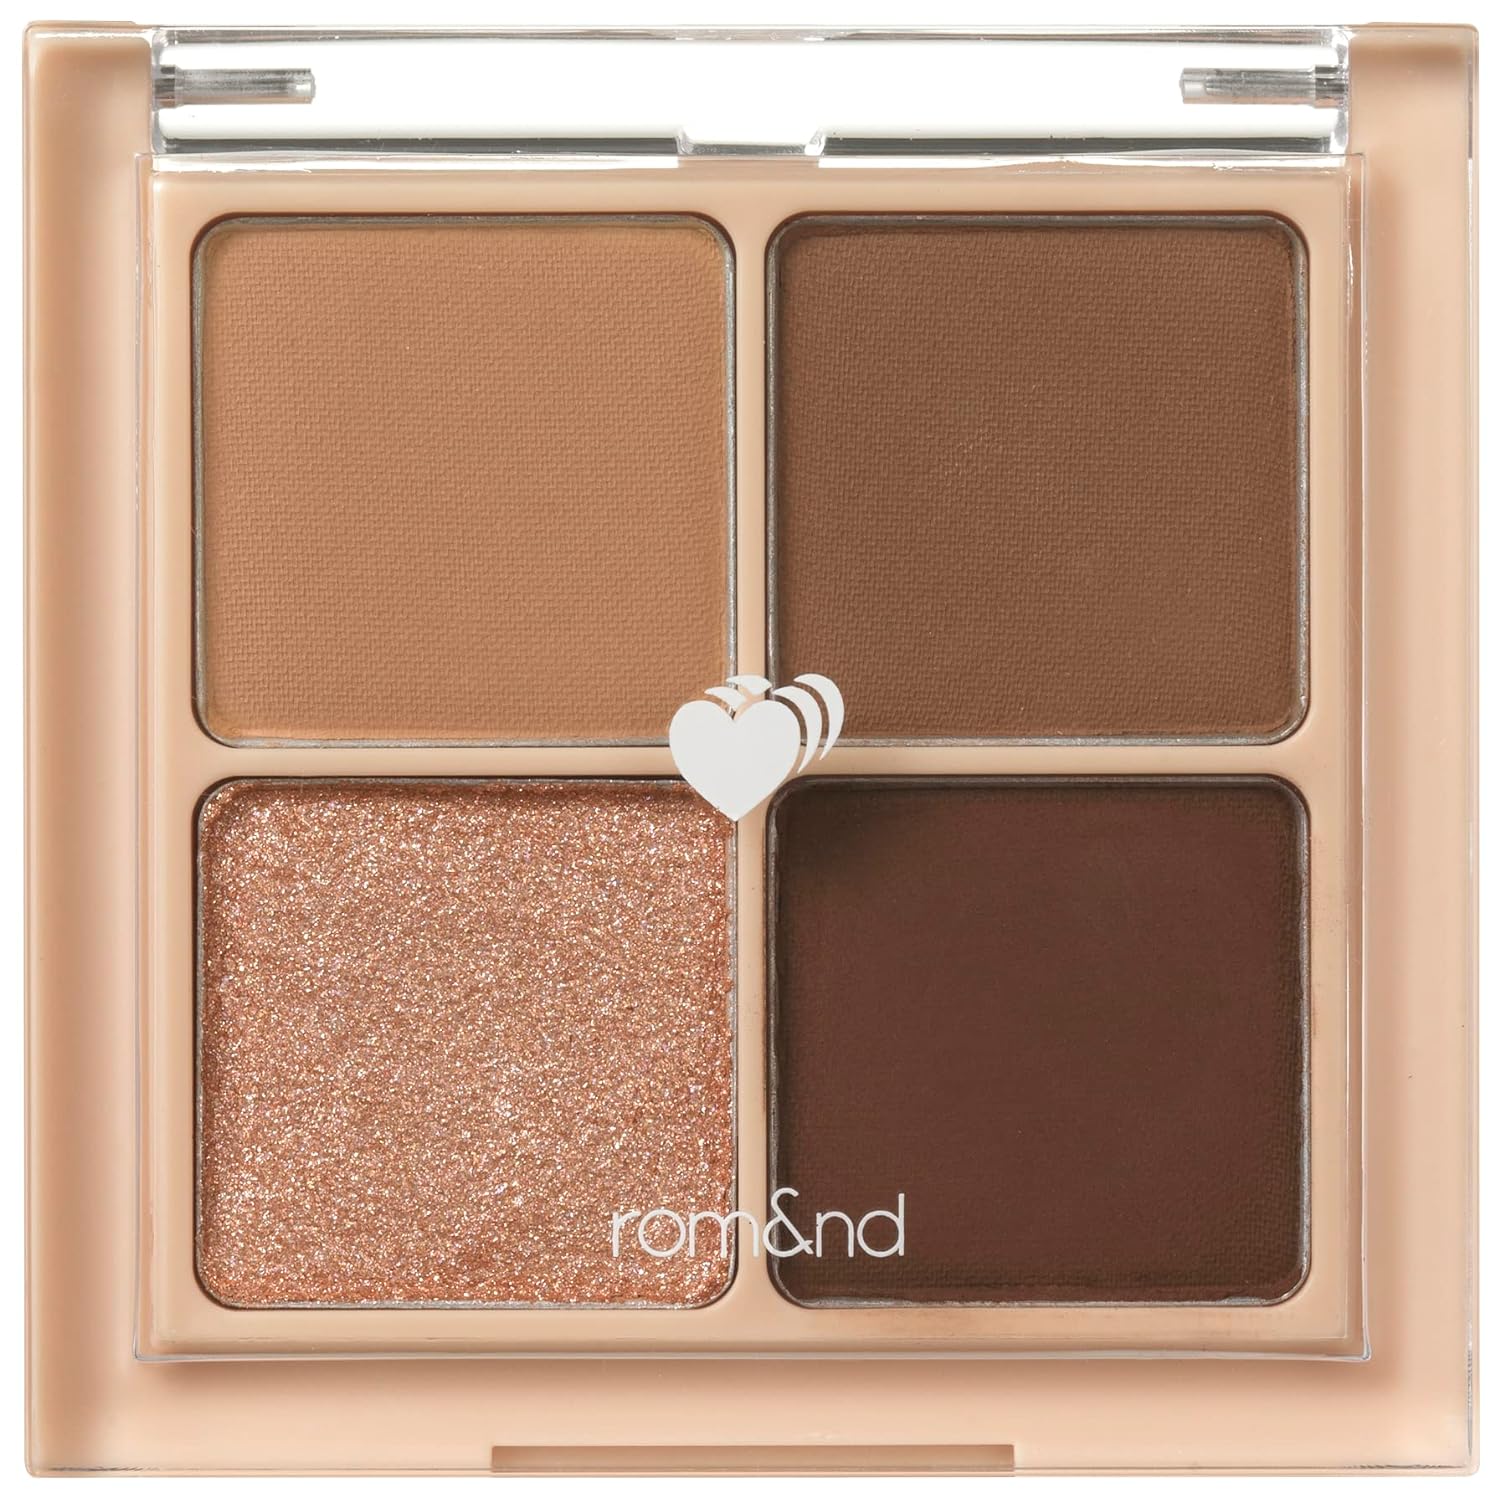 ''rom&nd Better than Eyes 4 Color Mini Palette, 03 Dry Ragras, Eye Shadow Palette, Daily Natural 